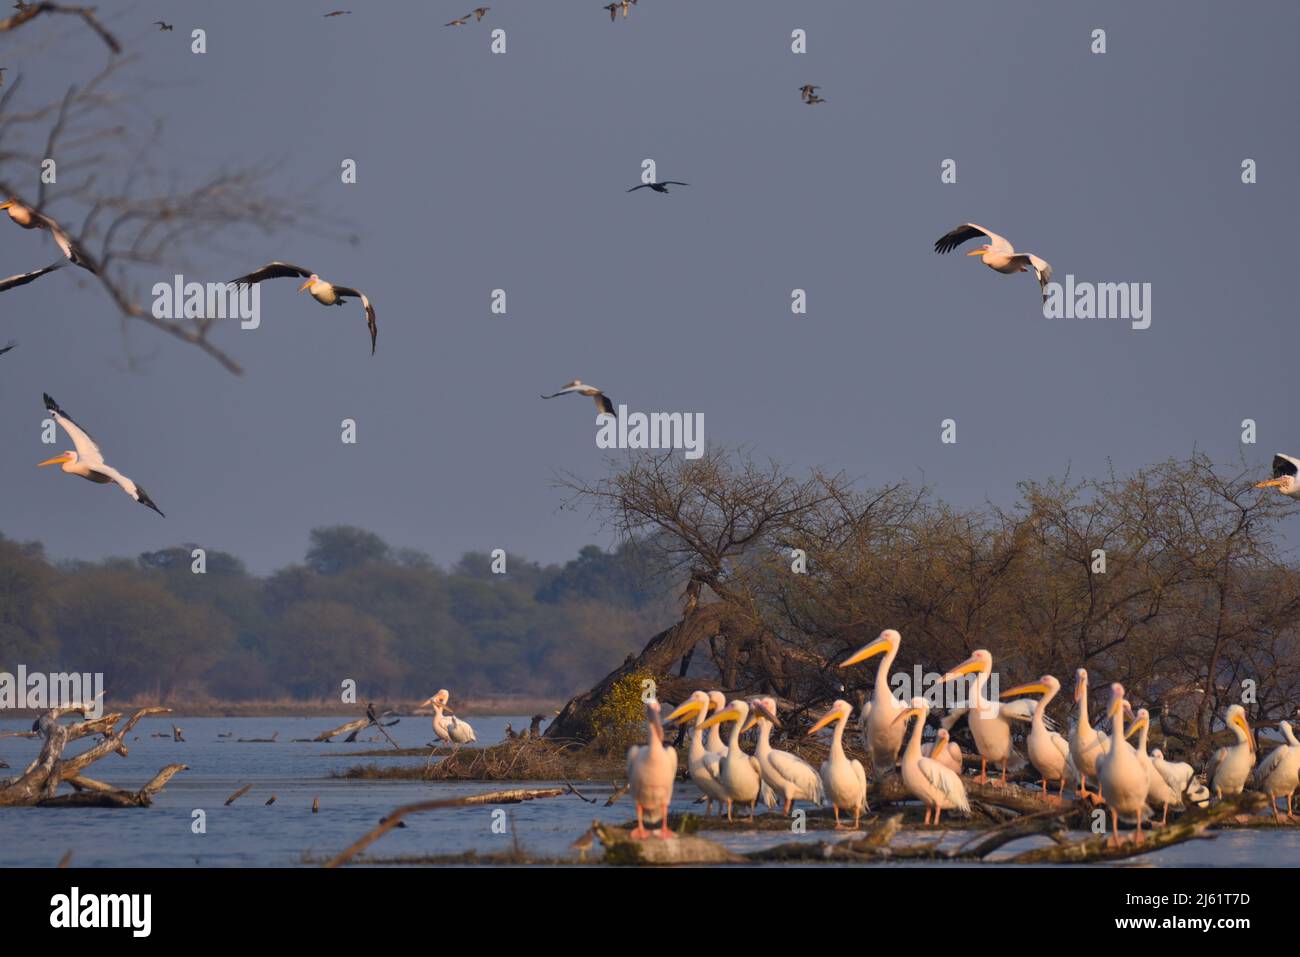 Pelicans in Keoladeo National Park stock photo Stock Photo - Alamy